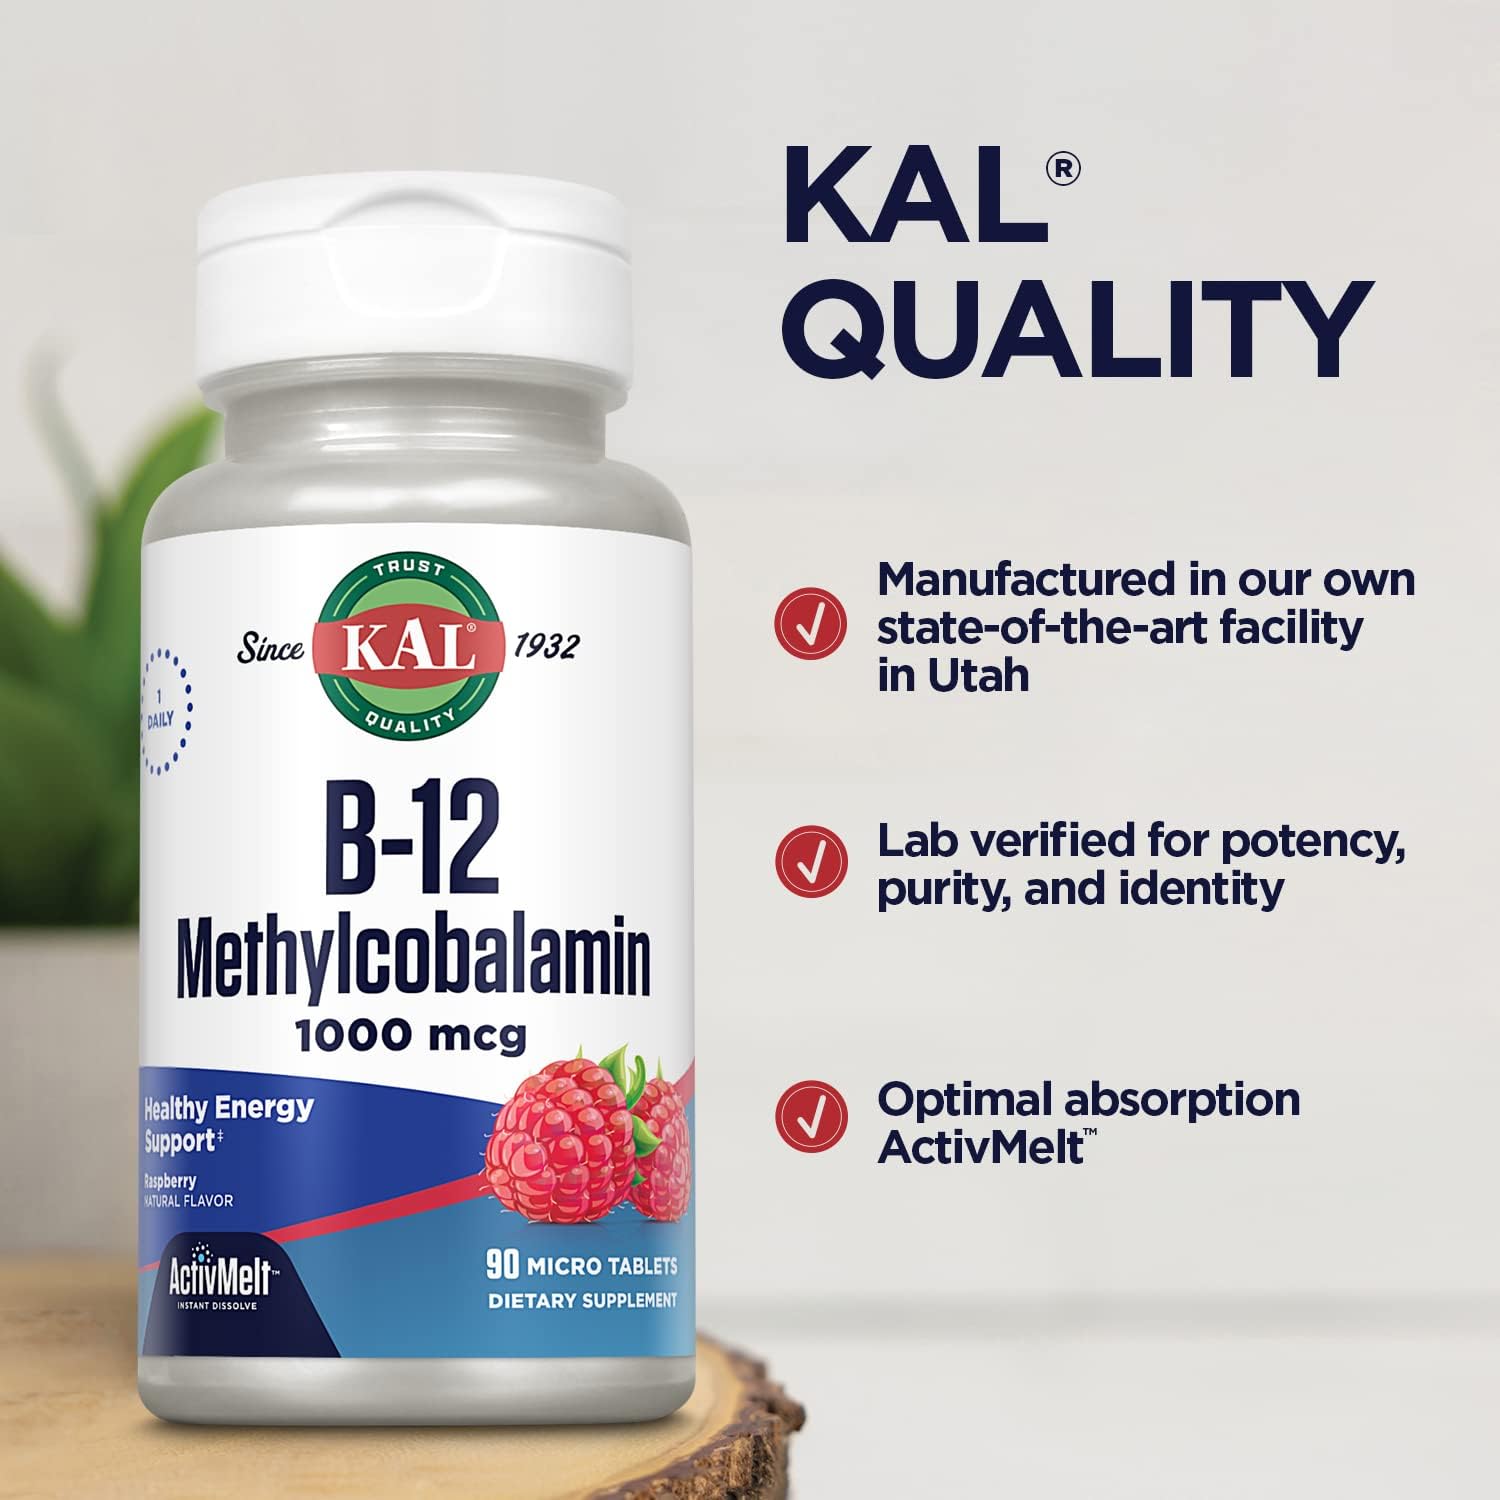 KAL Vitamin B12 Methylcobalamin 1000mcg, Healthy Energy, Metabolism, Nerve & Red Blood Cell Support,* Fast Dissolve ActivMelt, Optimal Absorption, Natural Raspberry Flavor, 90 Servings, 90 Micro Tabs : Health & Household